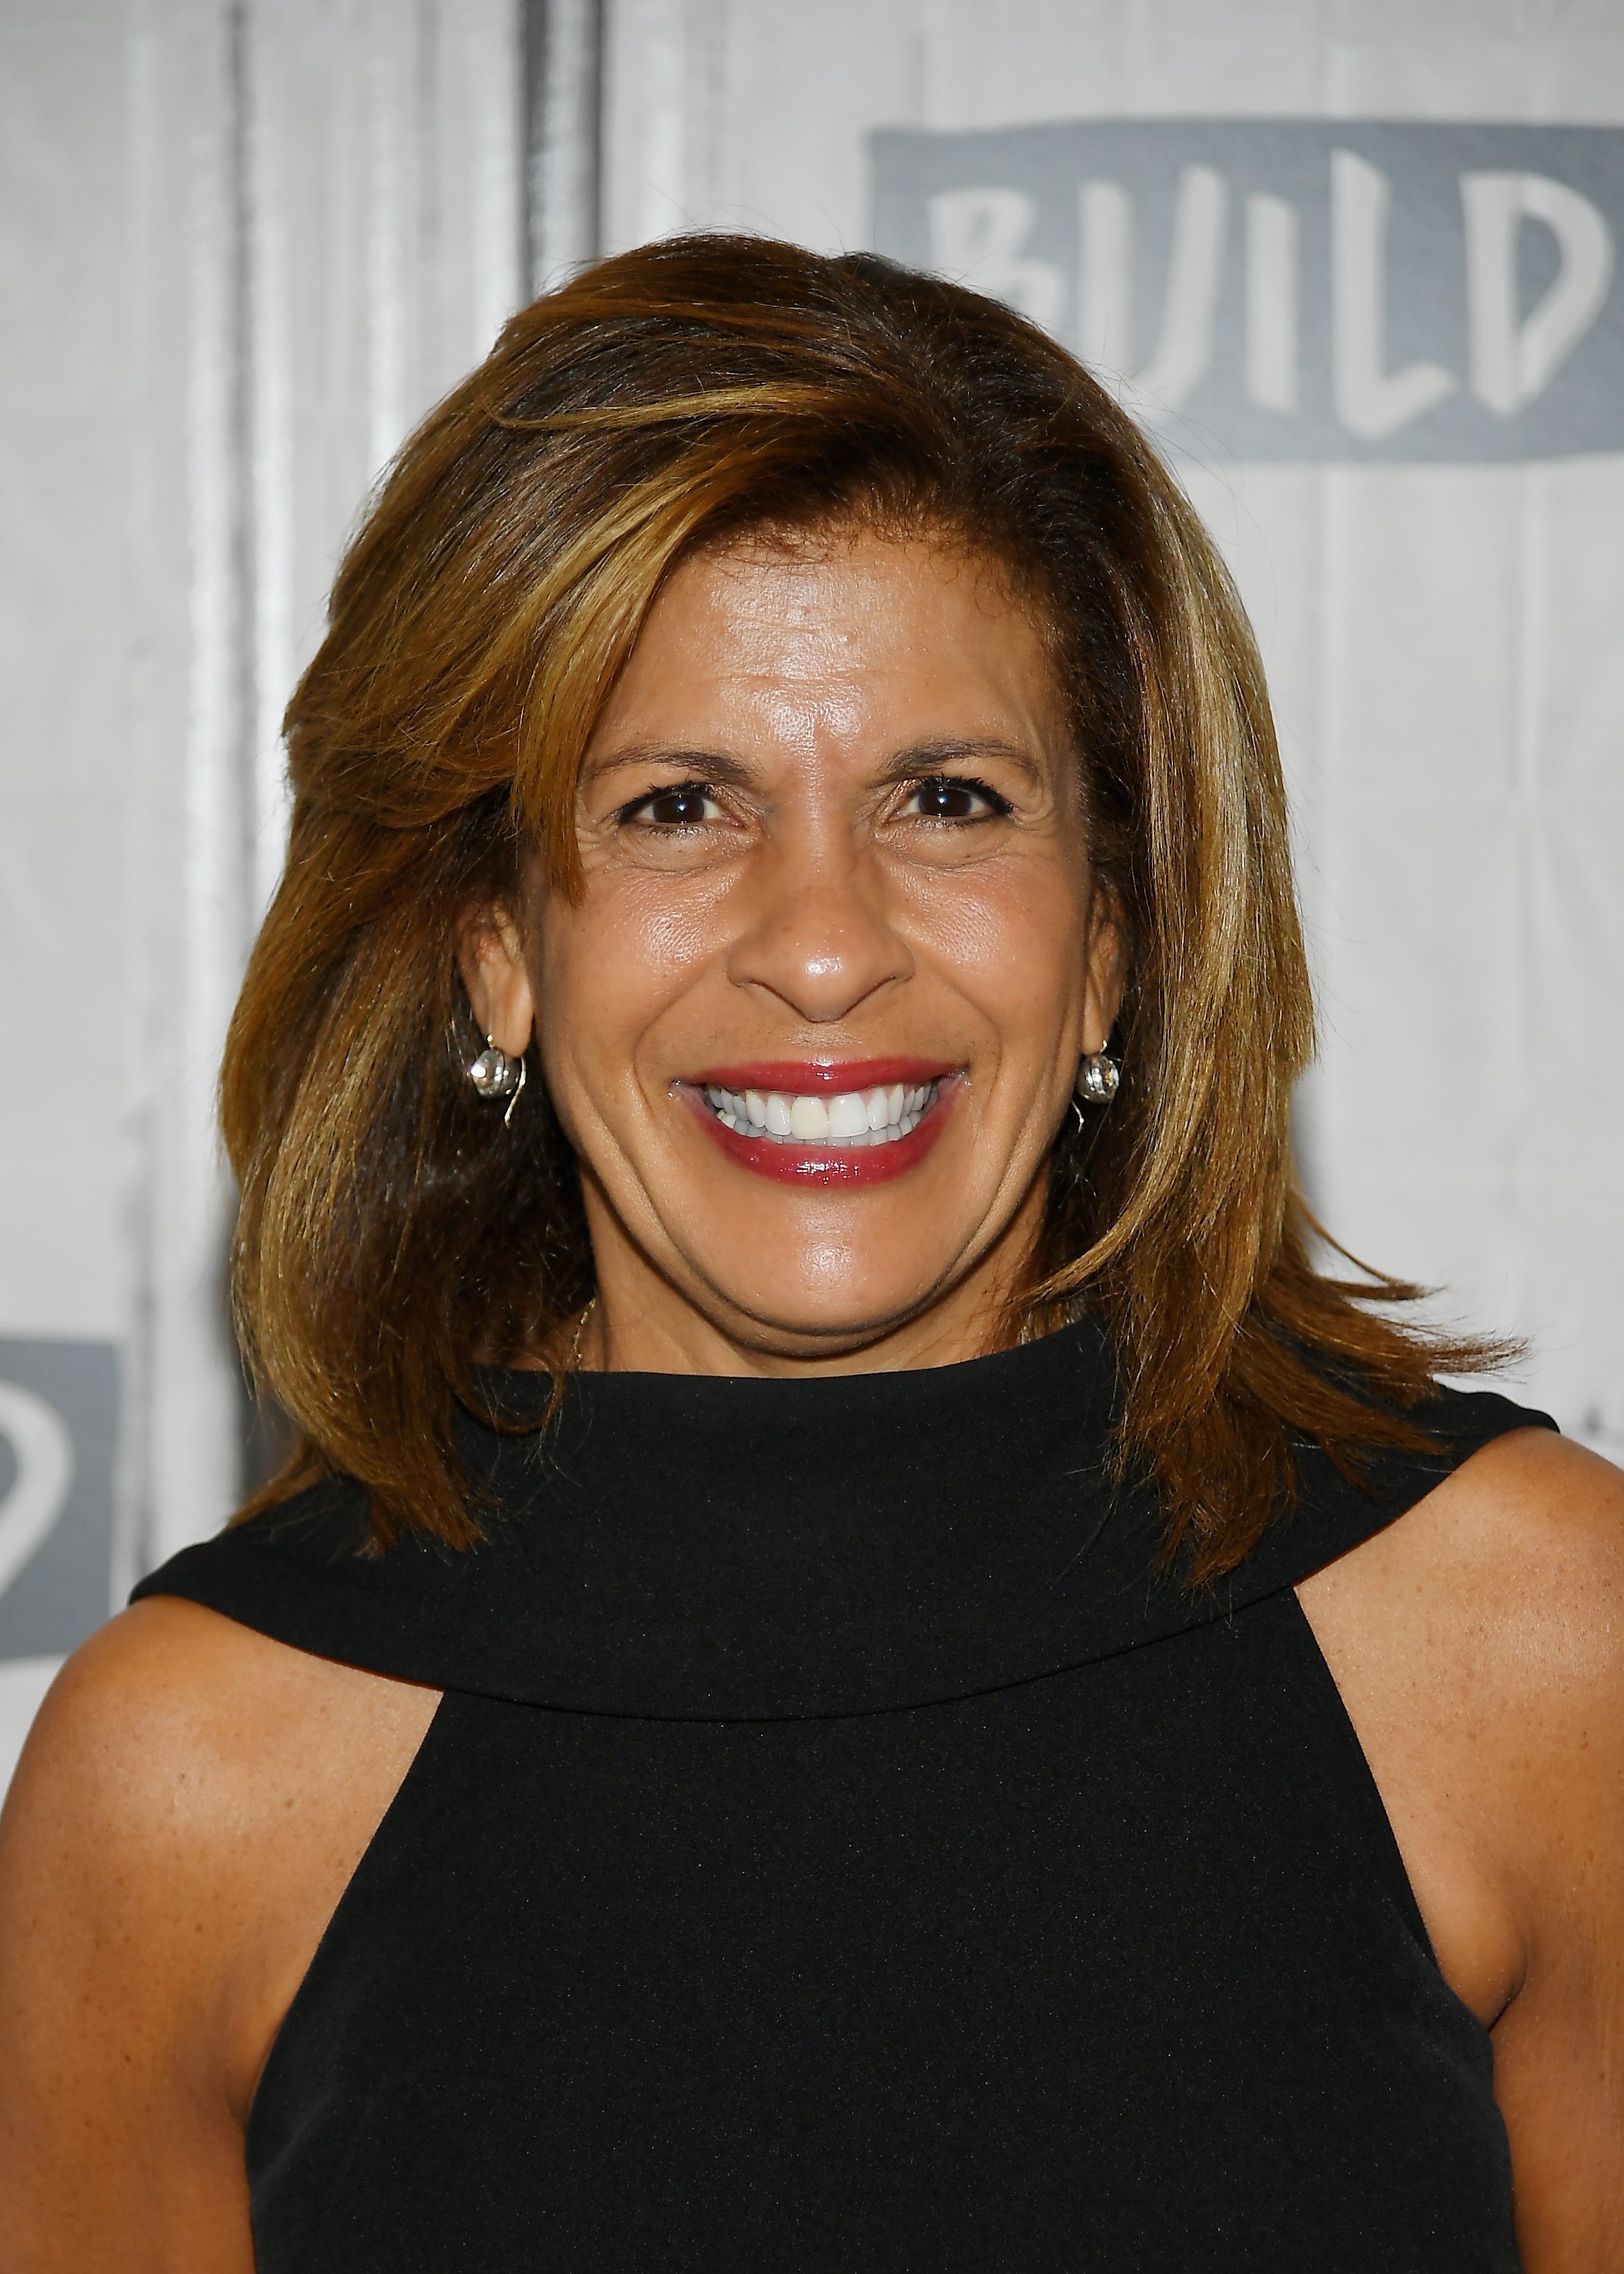 Hoda Kotb visits Build to discuss her new book "You Are My Happy" at Build Studio on March 12, 2019 in New York City | Source: Getty Images